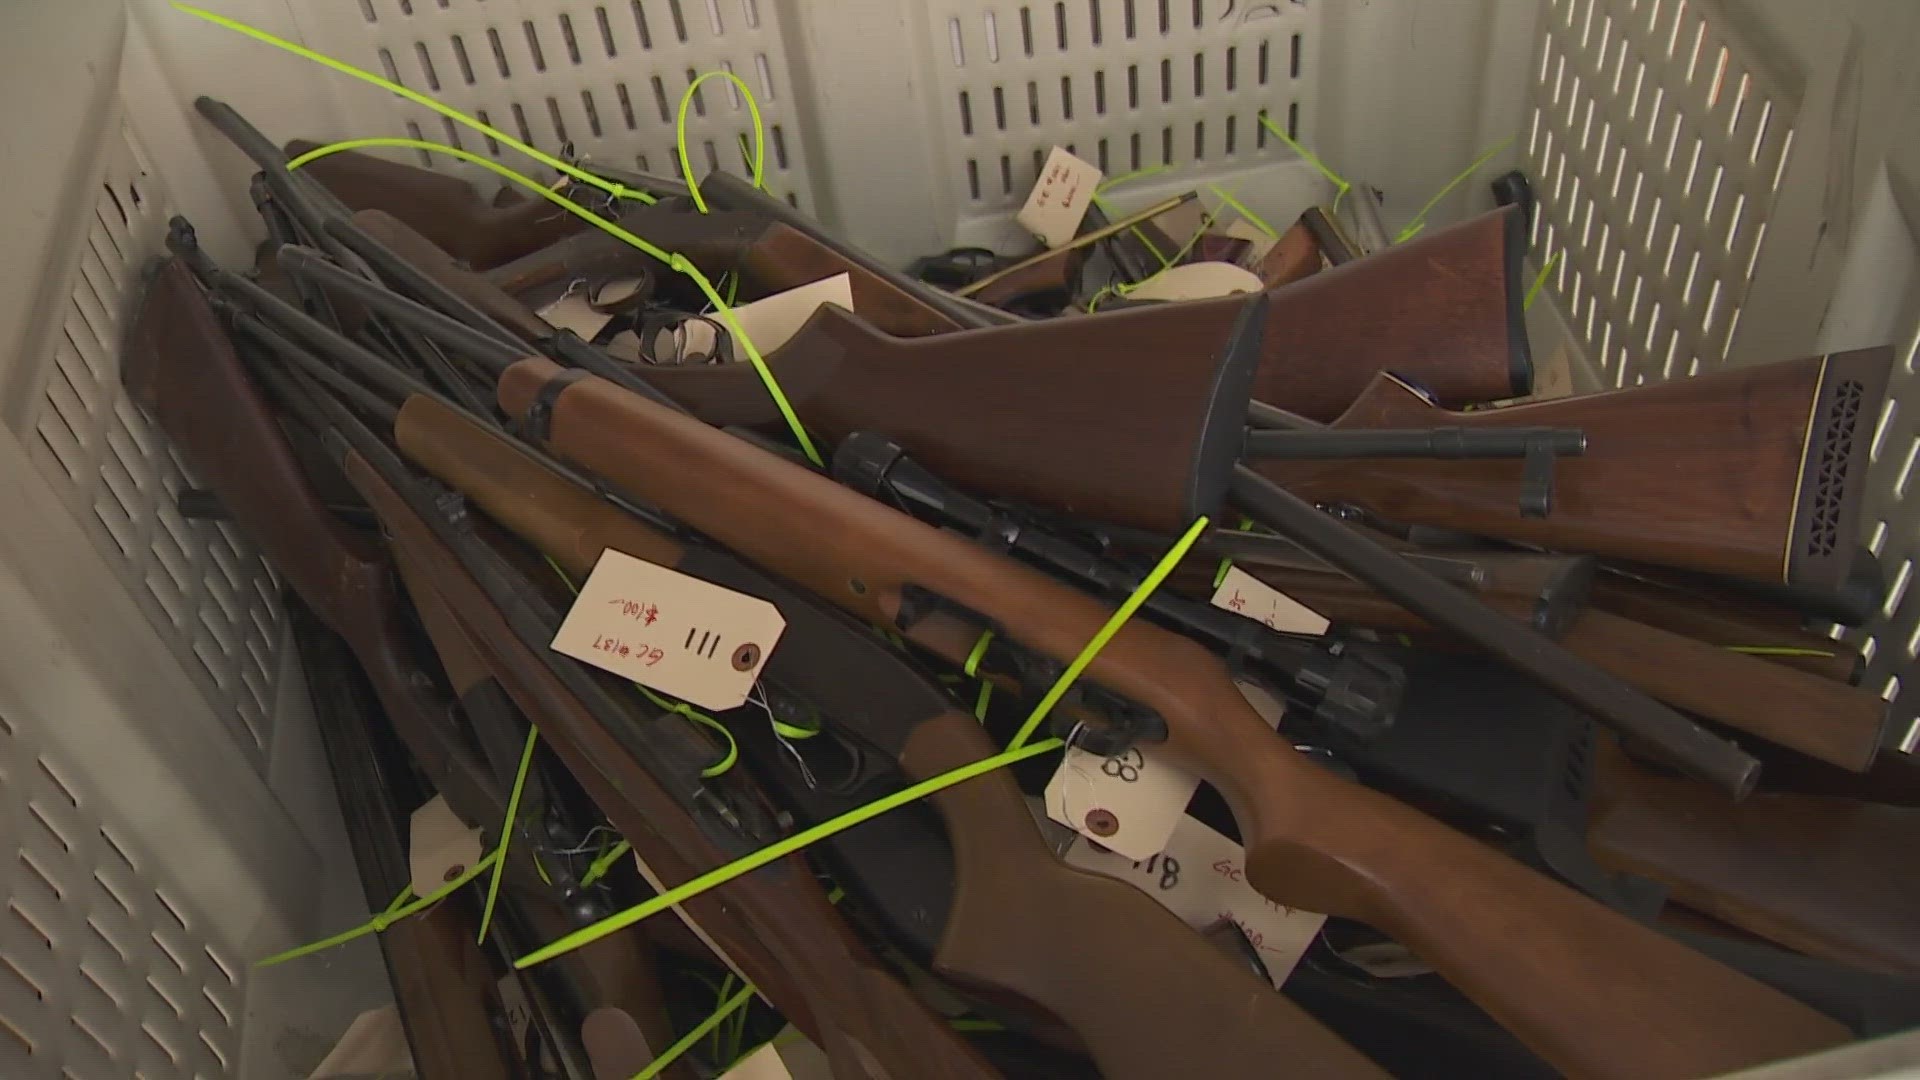 The King County Sheriff's Office held a gun buyback event in Burien on Saturday. The agency collected 287 firearms and paid out $36,525 in gift cards.